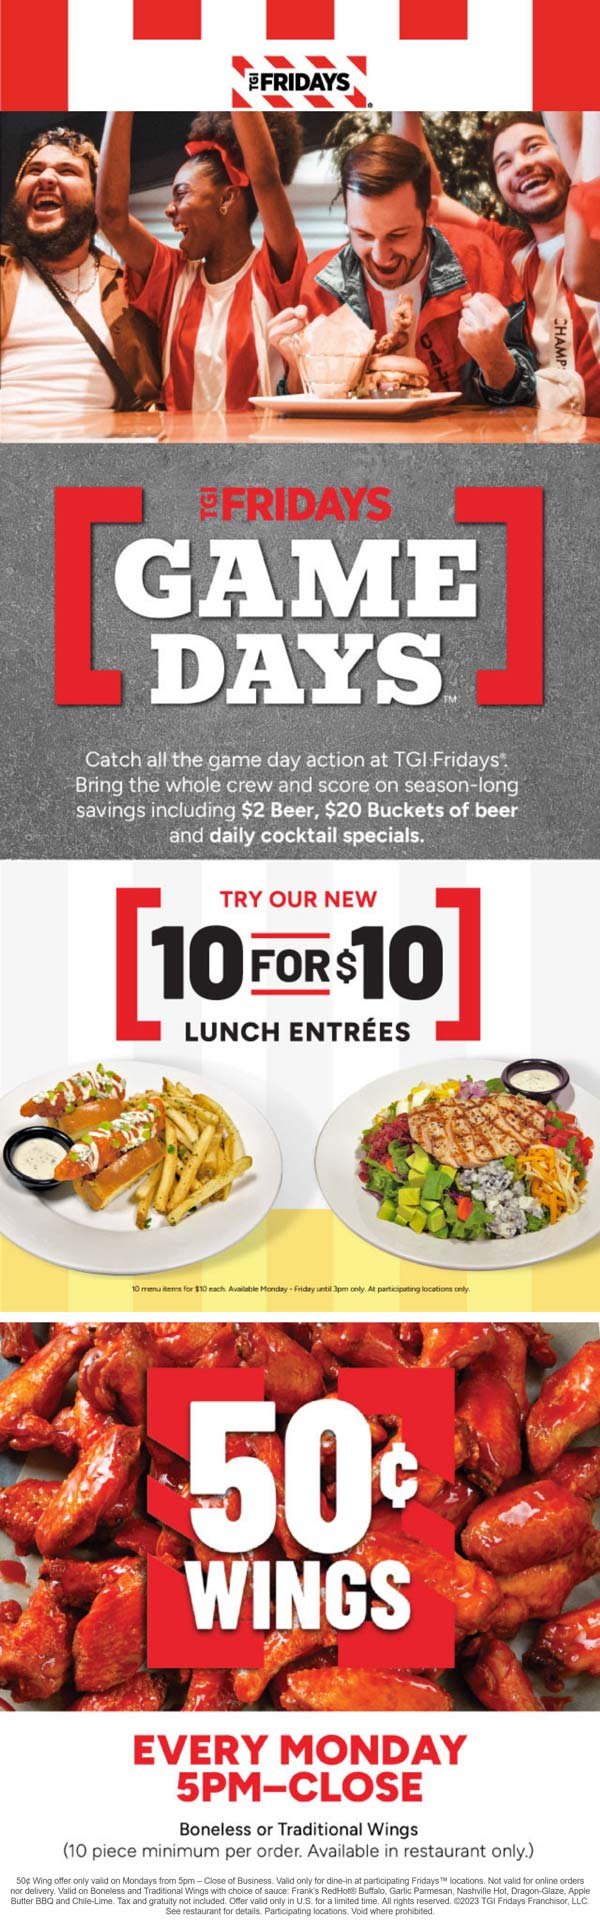 TGI Fridays restaurants Coupon  $2 game day beer, 10 for $10 lunch entrees & .50 cent wings at TGI Fridays #tgifridays 